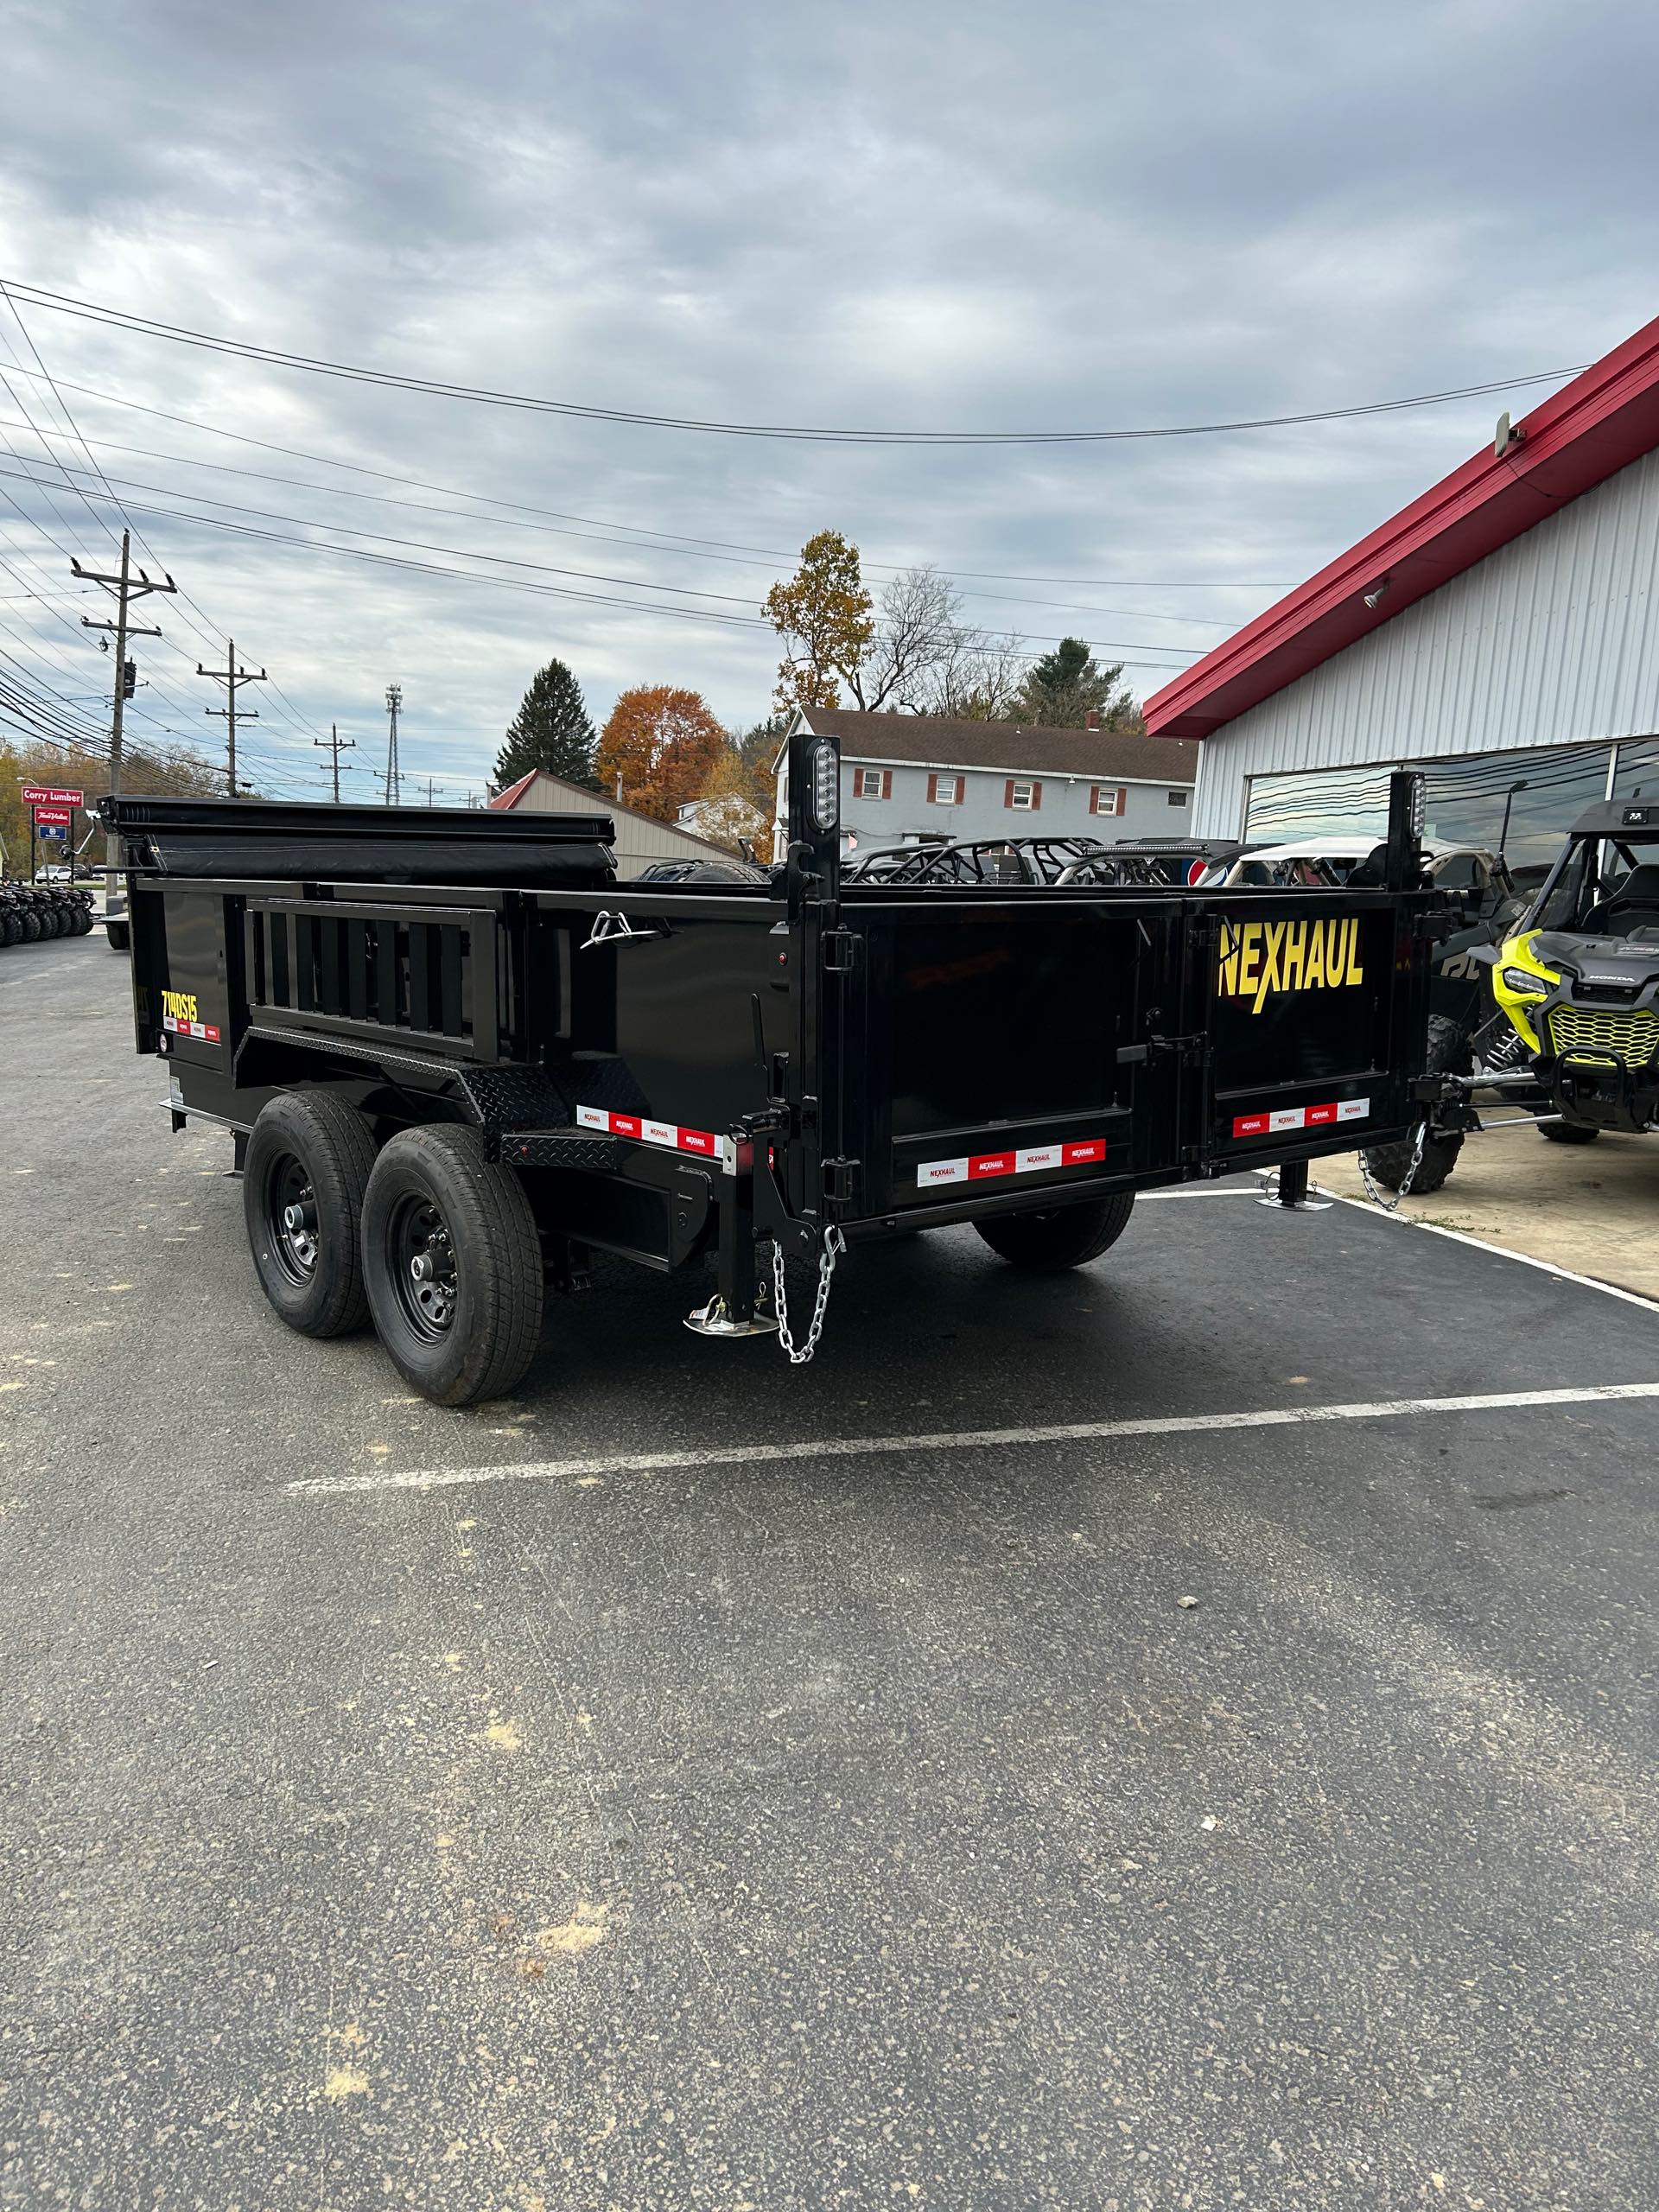 2024 NEXHAUL 15k83x14 at Leisure Time Powersports of Corry